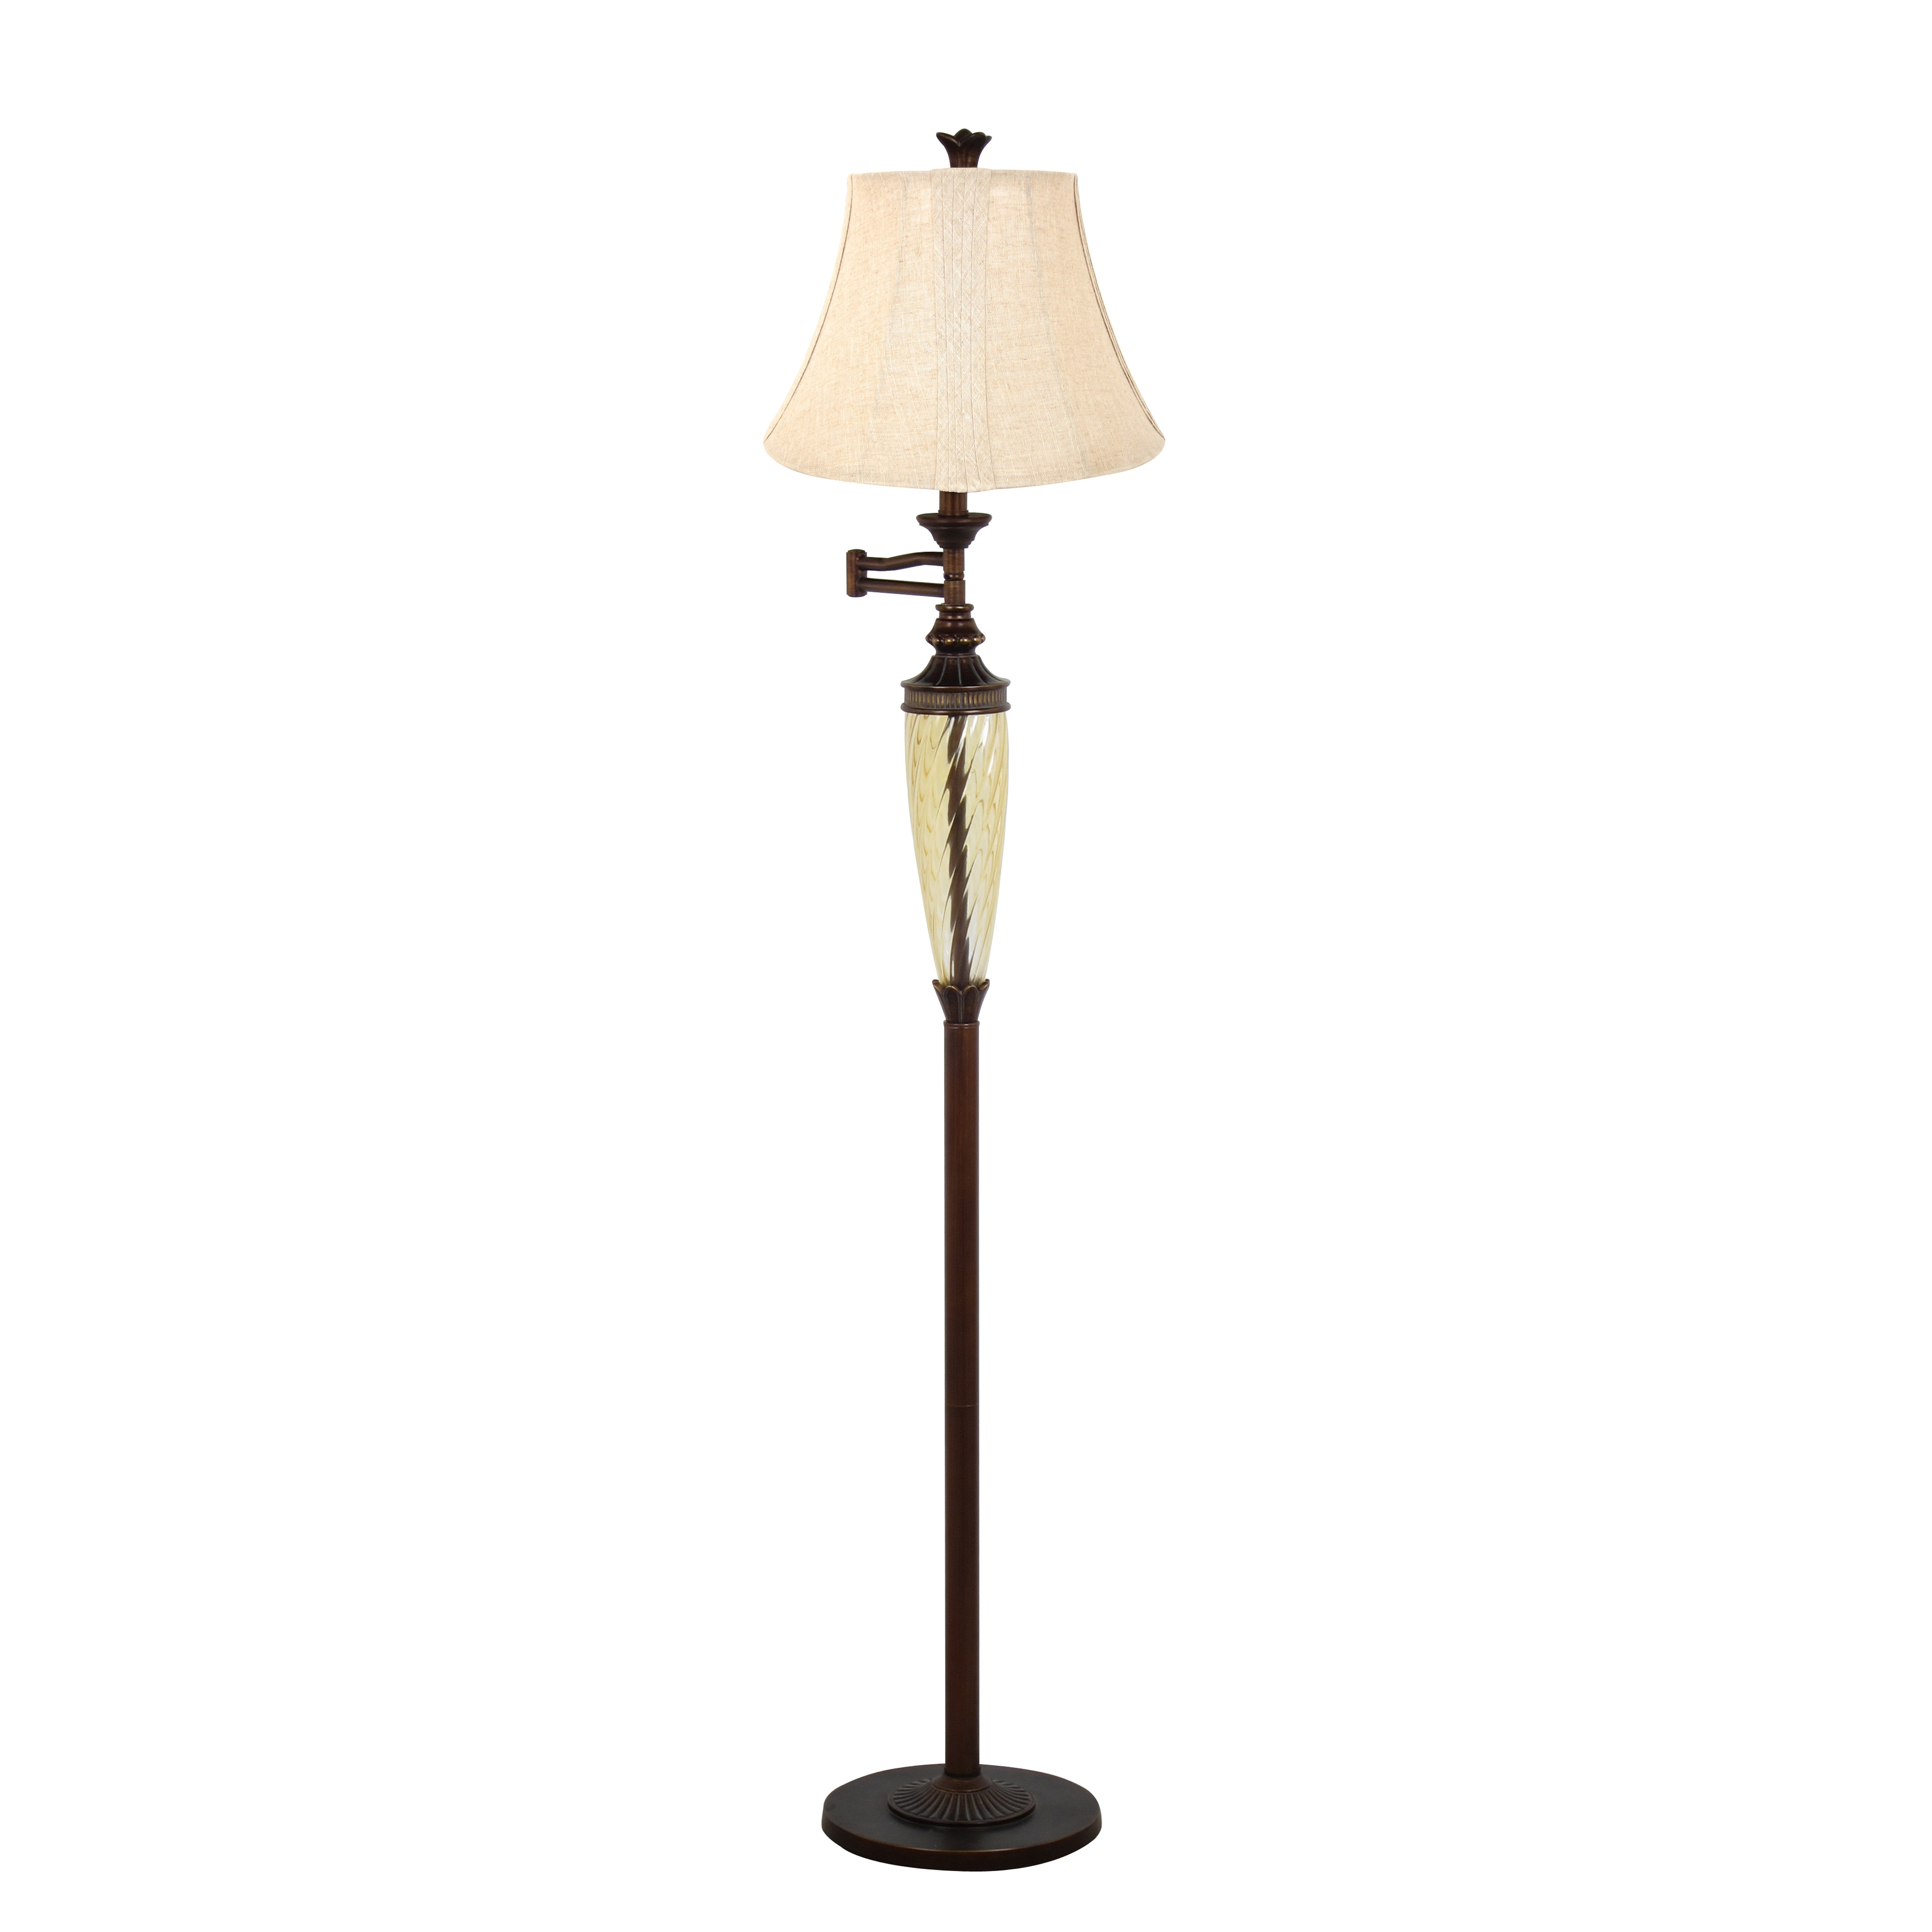 Legacy Home Furnishing and Decor 60" Swirl Glass Column With Swing Arm Floor Lamp And Beige Linen Bell Shade